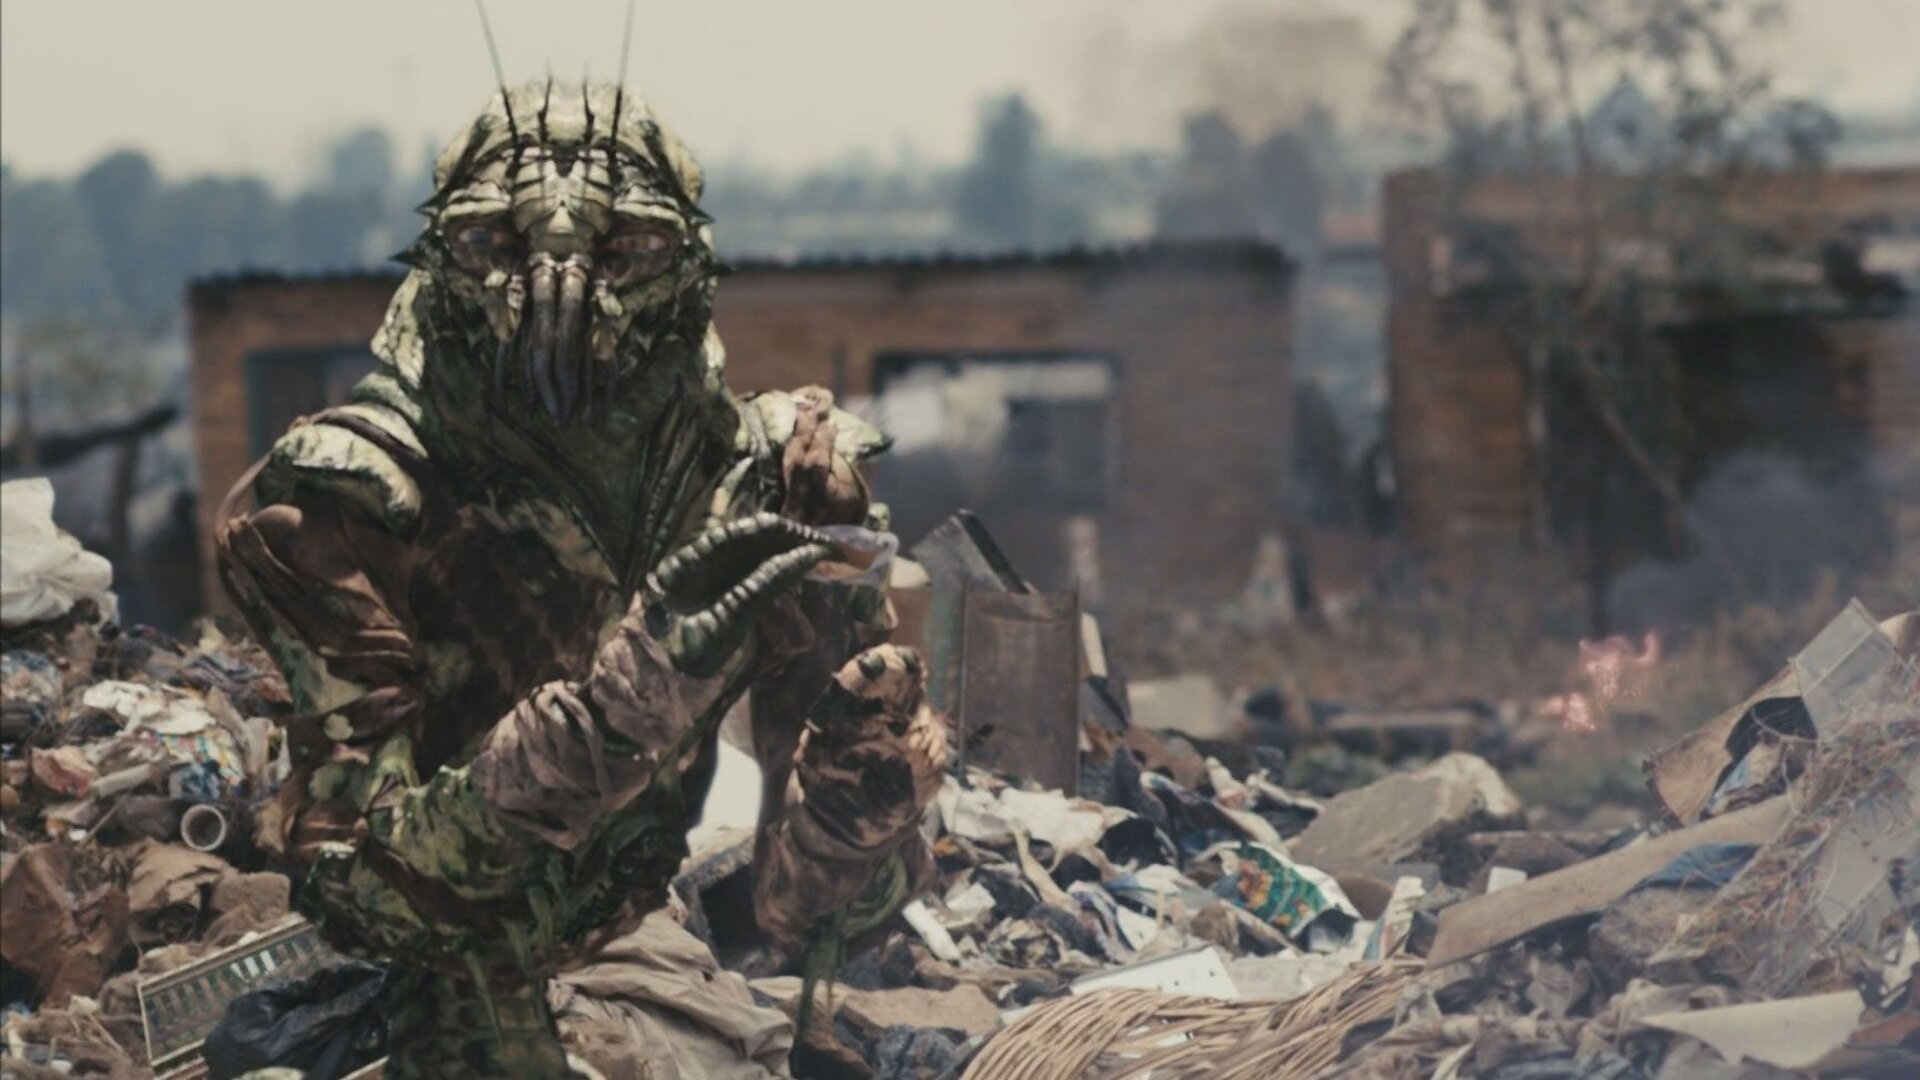 District 9: A sci-fi film directed by Neill Blomkamp and produced by Carolynne Cunningham and Peter Jackson. 1920x1080 Full HD Background.